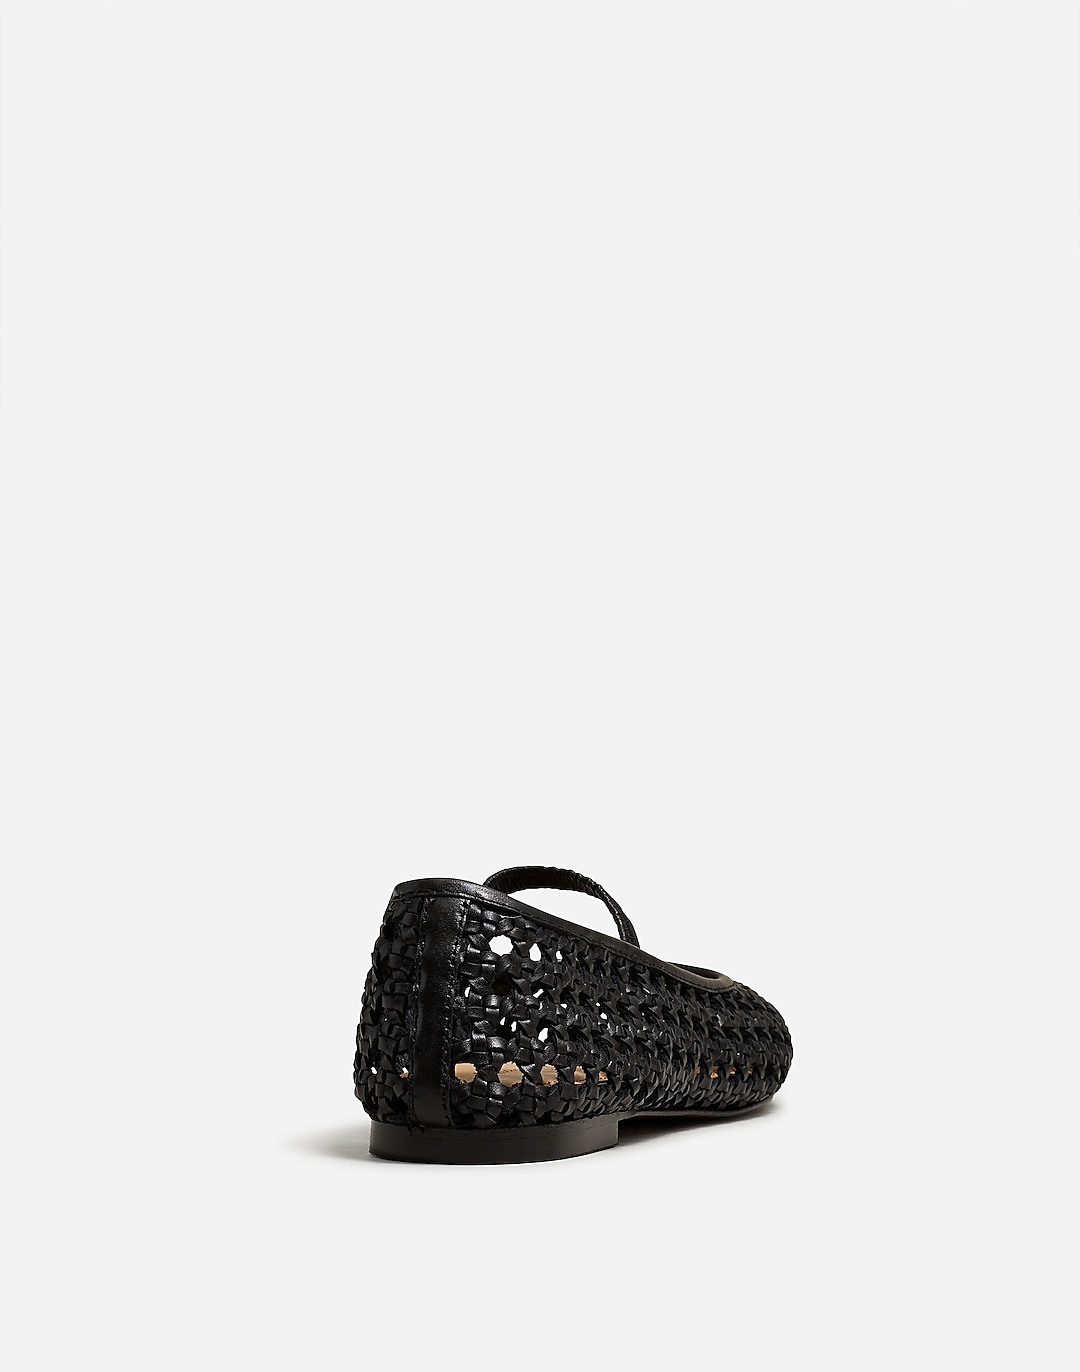 The Greta Ballet Flat in Open-Weave Leather | Madewell